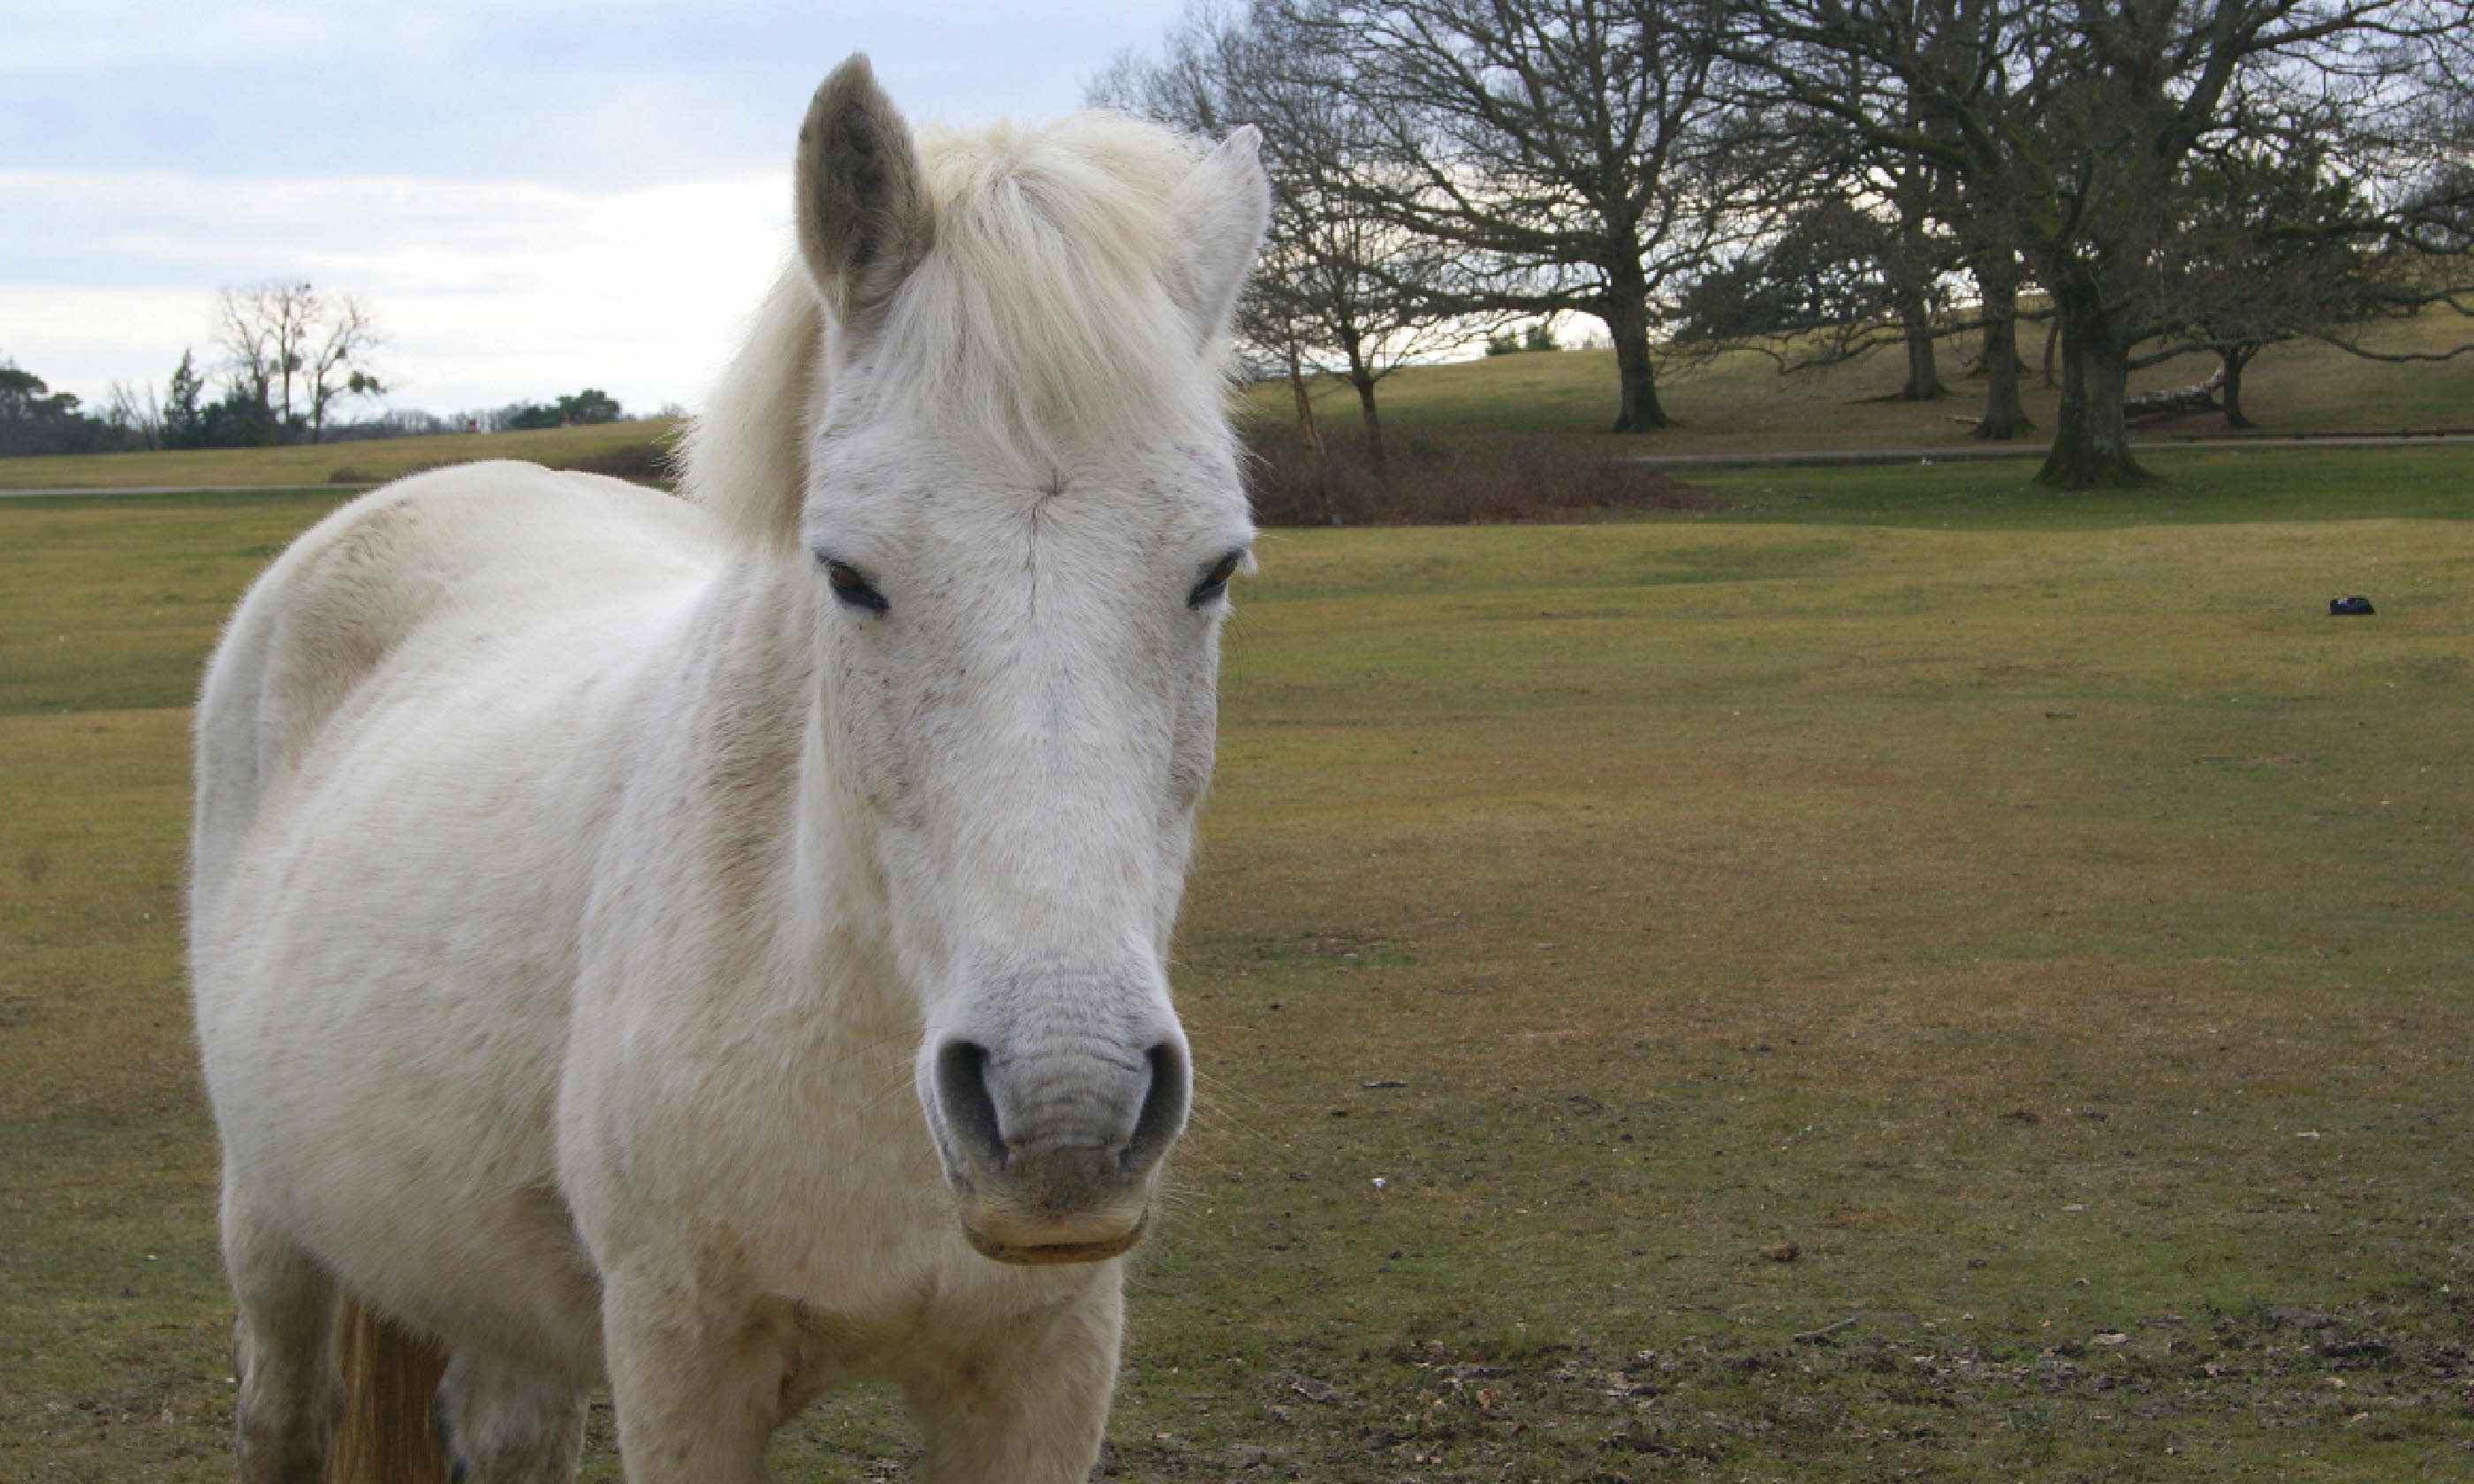 Roaming with ponies in England's New Forest National Park (Photo: Emma Higgins)